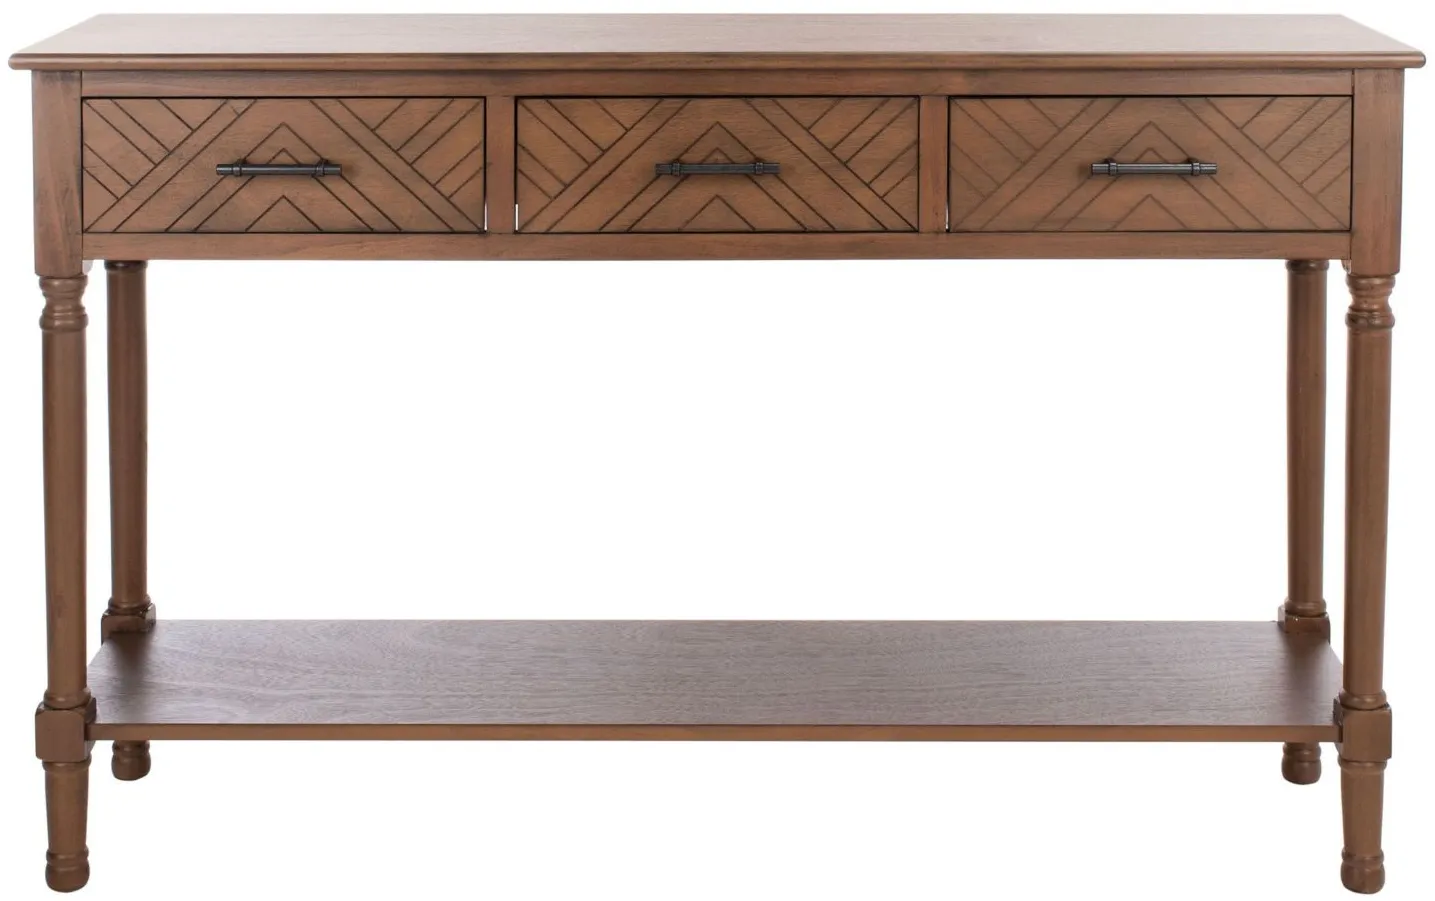 Jovie 3 Drawer Console Table in Brown by Safavieh